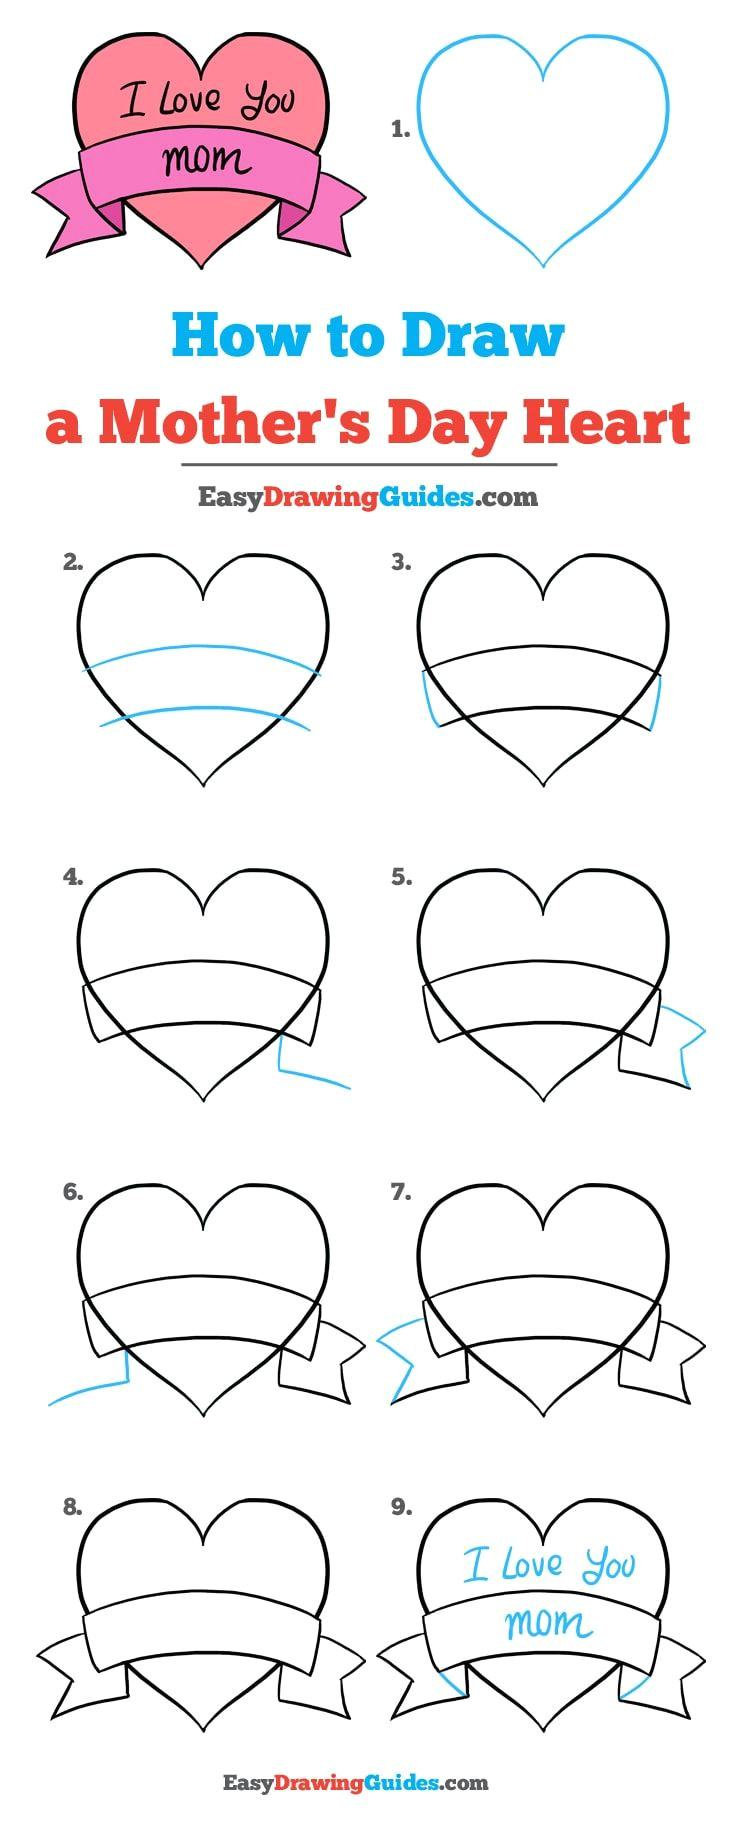 I Love You Easy Drawings How to Draw A Mother S Day Heart Really Easy Drawing Tutorial